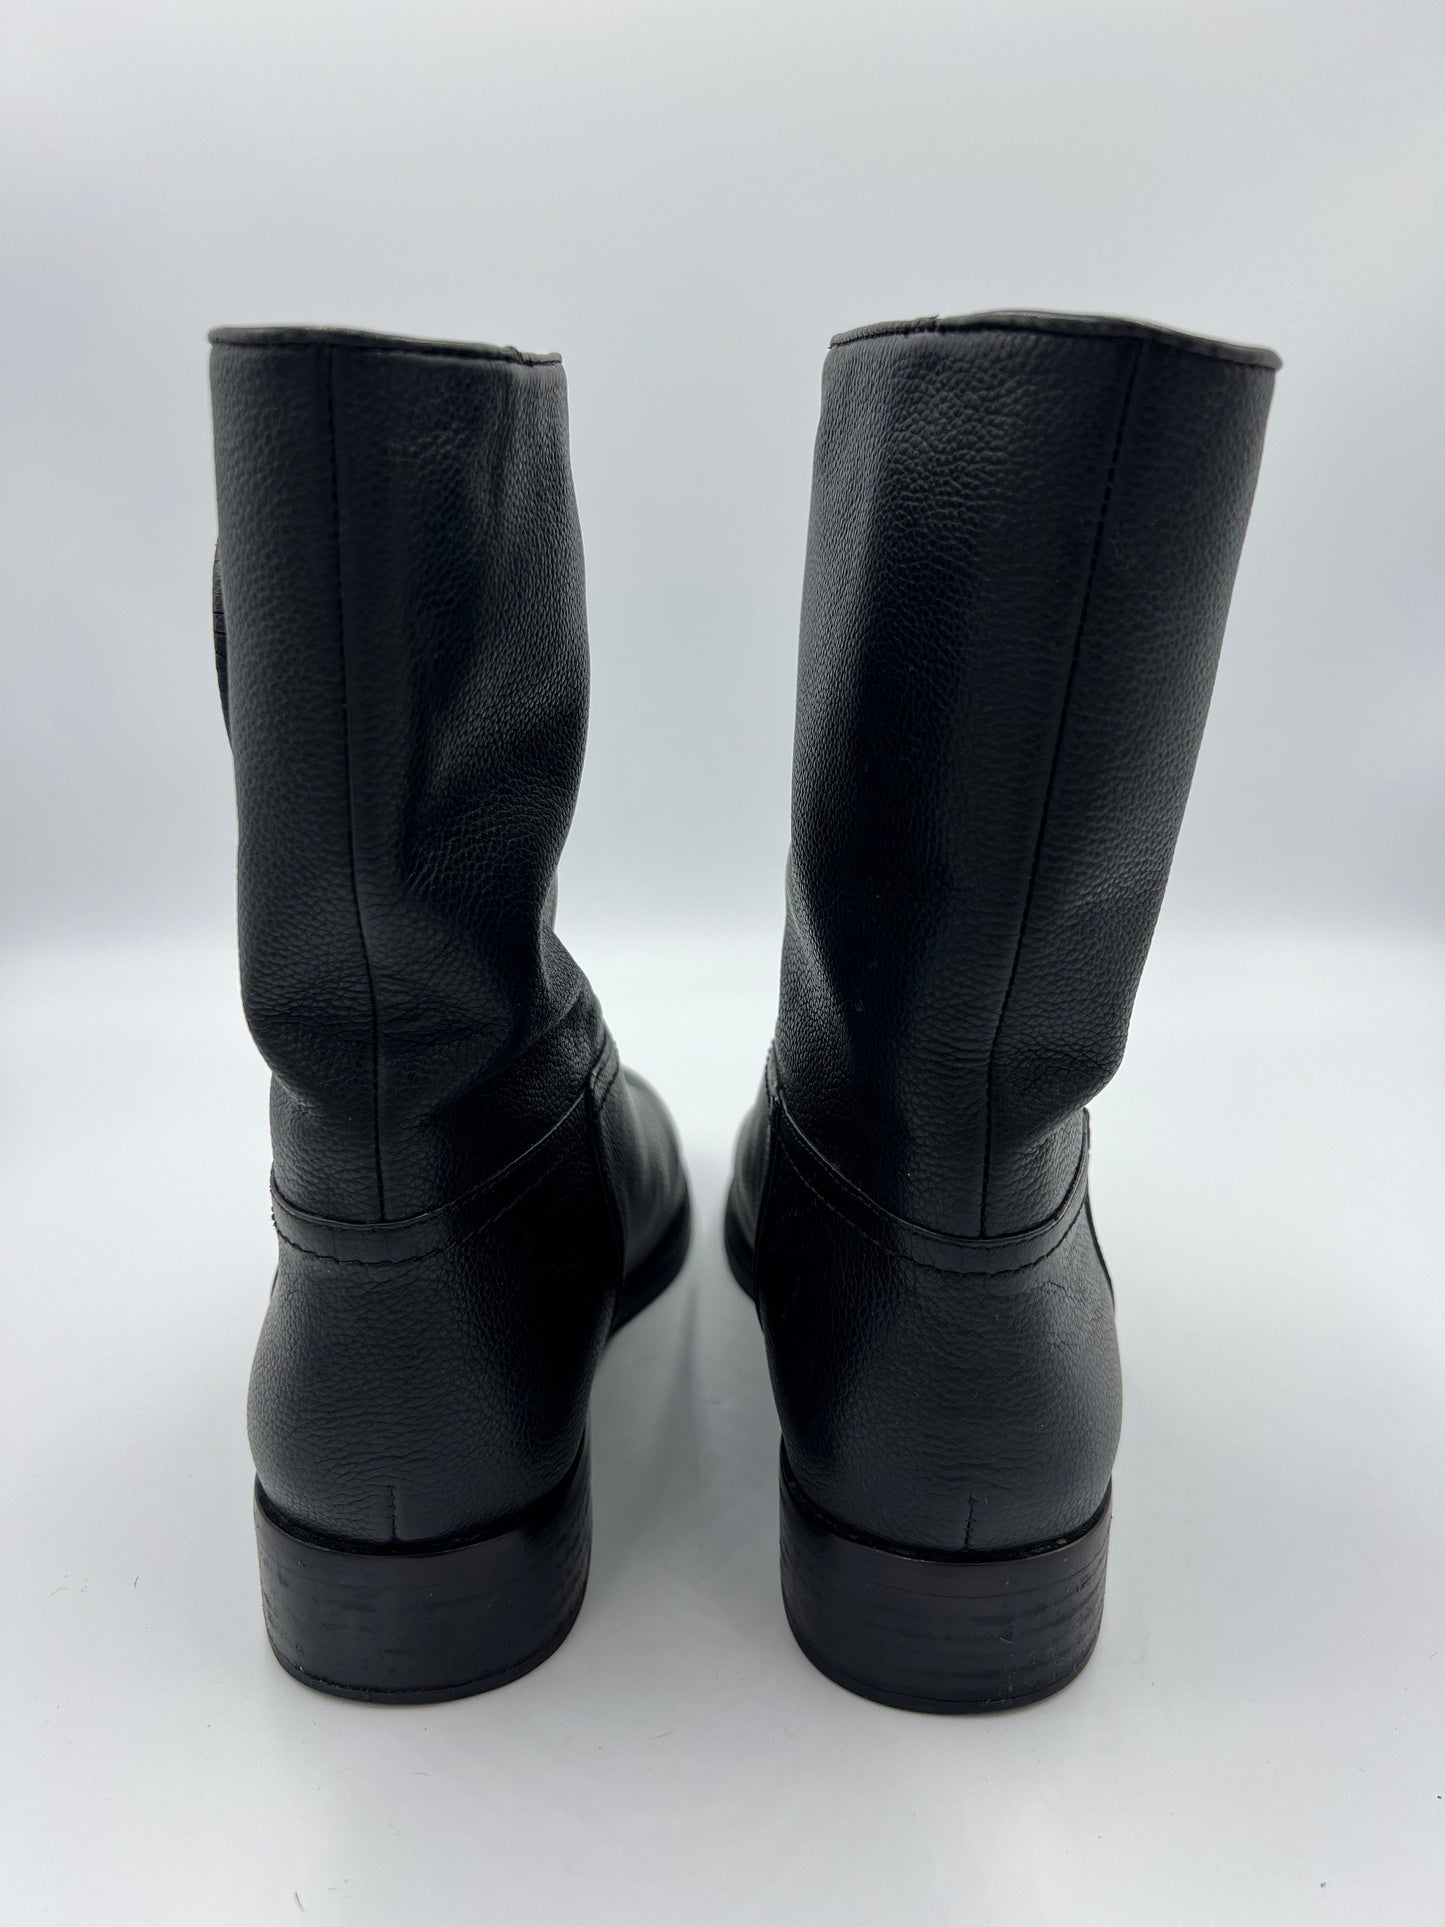 Boots Designer By Tory Burch  Size: 8